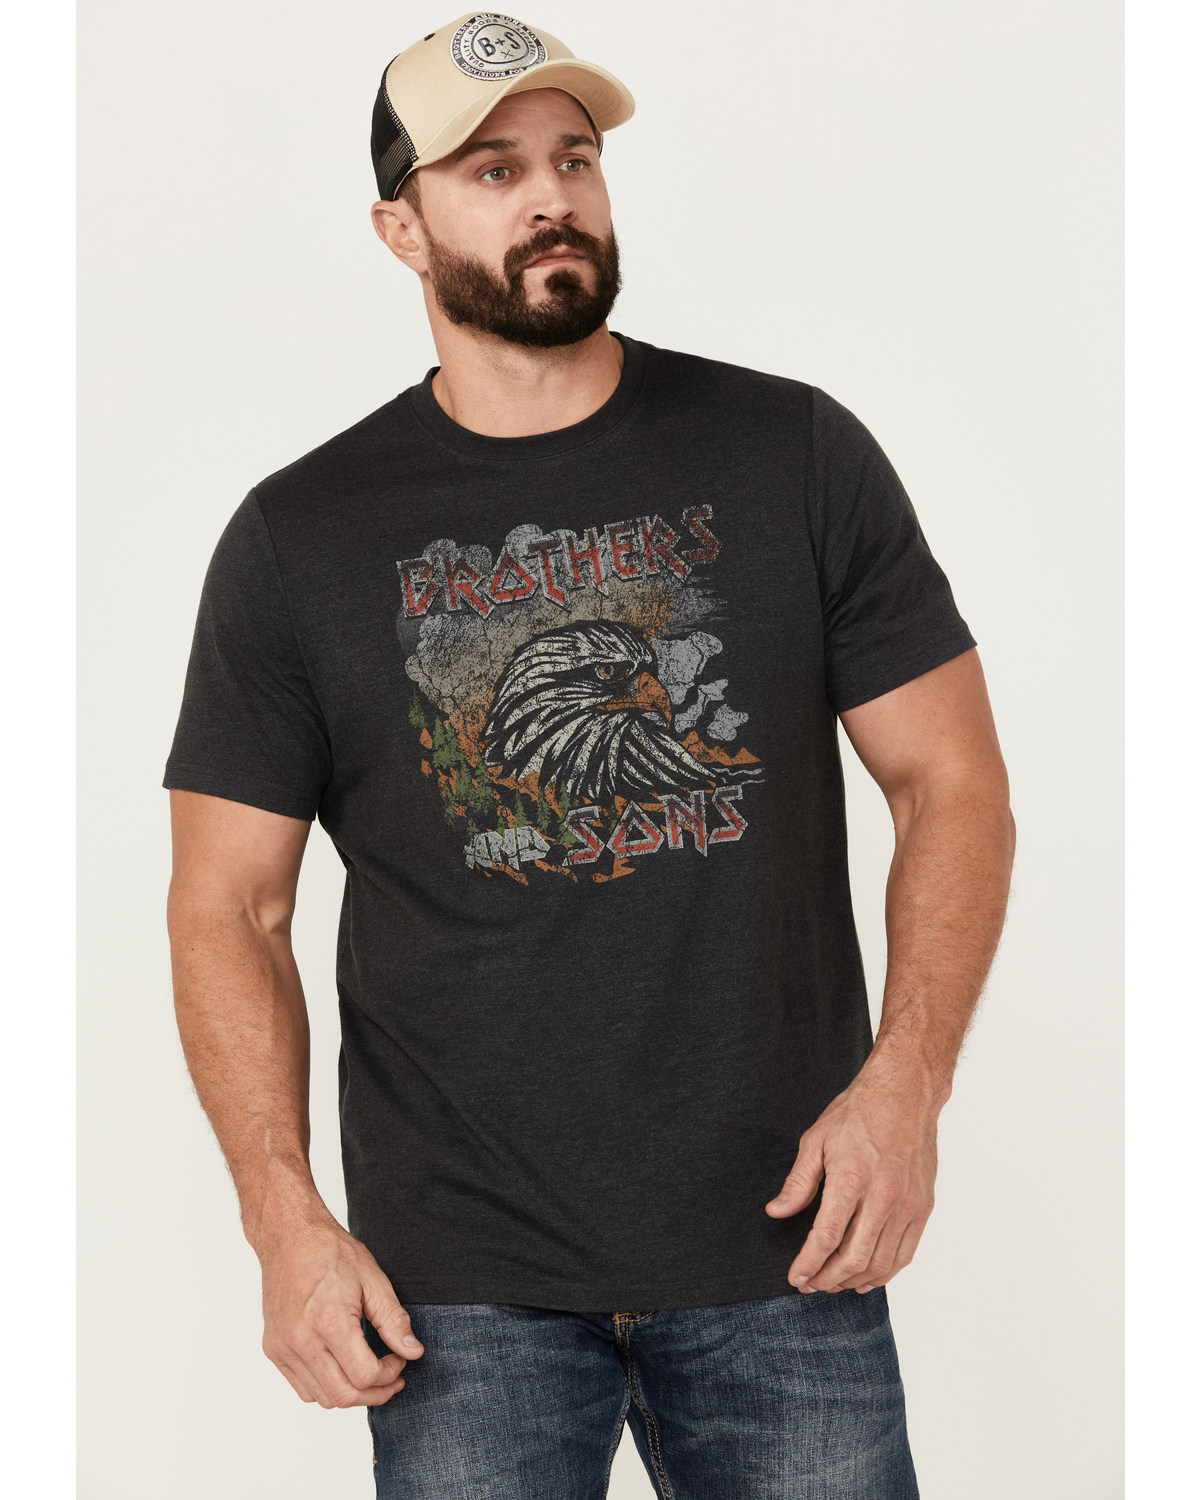 Brothers and Sons Men's Outlook Eagle Short Sleeve Graphic T-Shirt